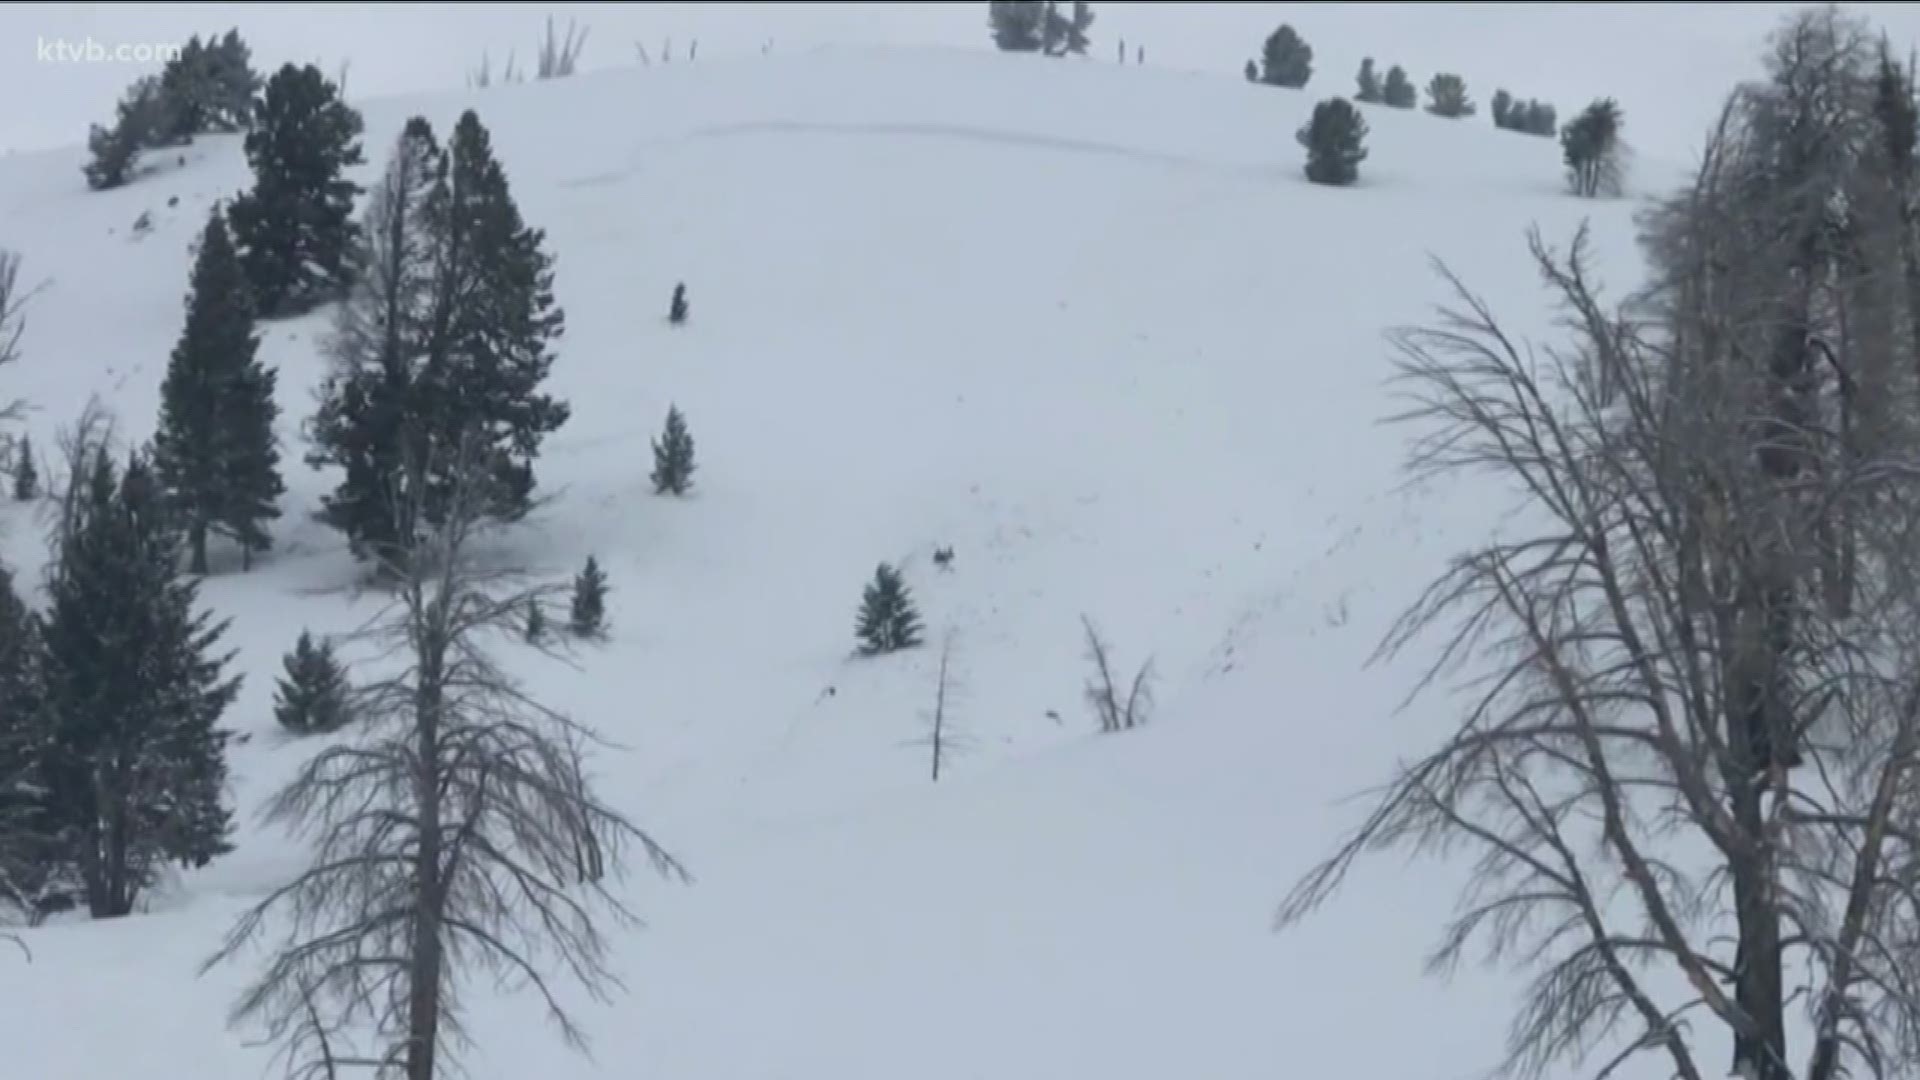 Officials say anyone who is planning on heading into avalanche-prone areas of Idaho's backcountry are urged to stick to gentler terrain.